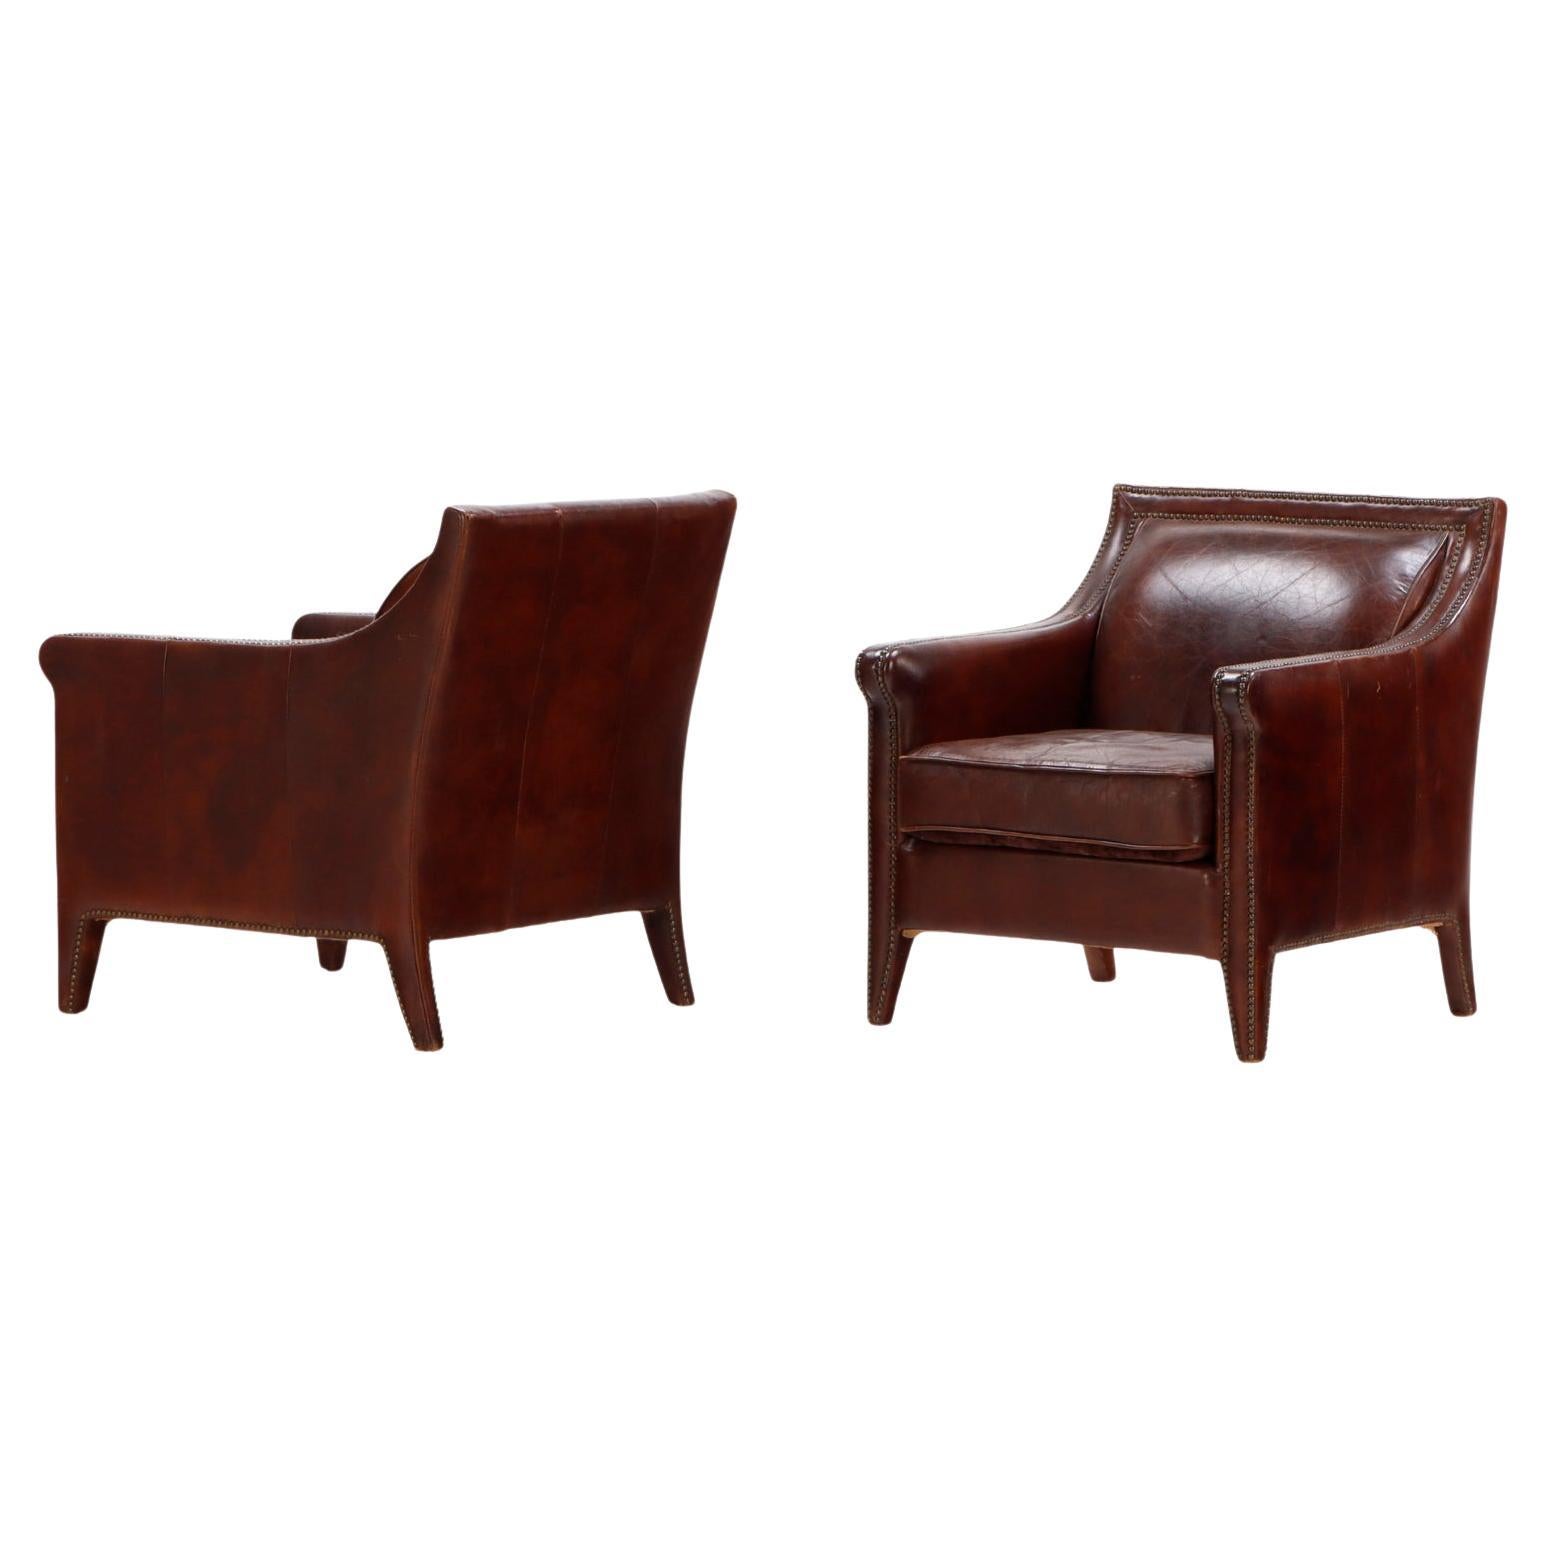 A pair of French leather club chairs circa 1970.